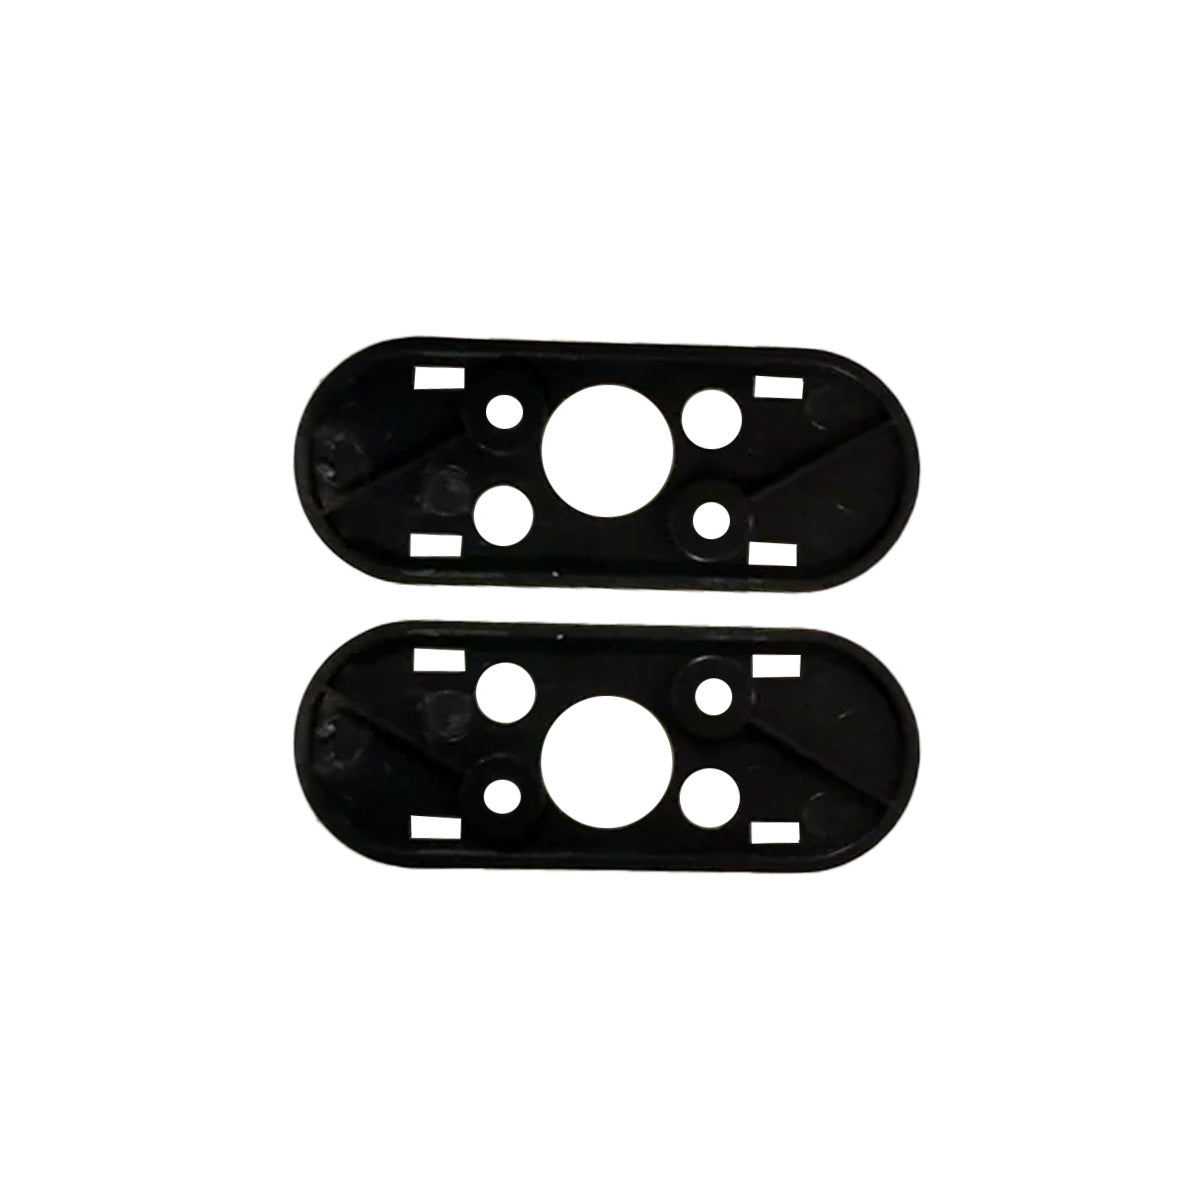 Rear Reflector Snap Fit Bases Kit - Only fits Air³ scooters